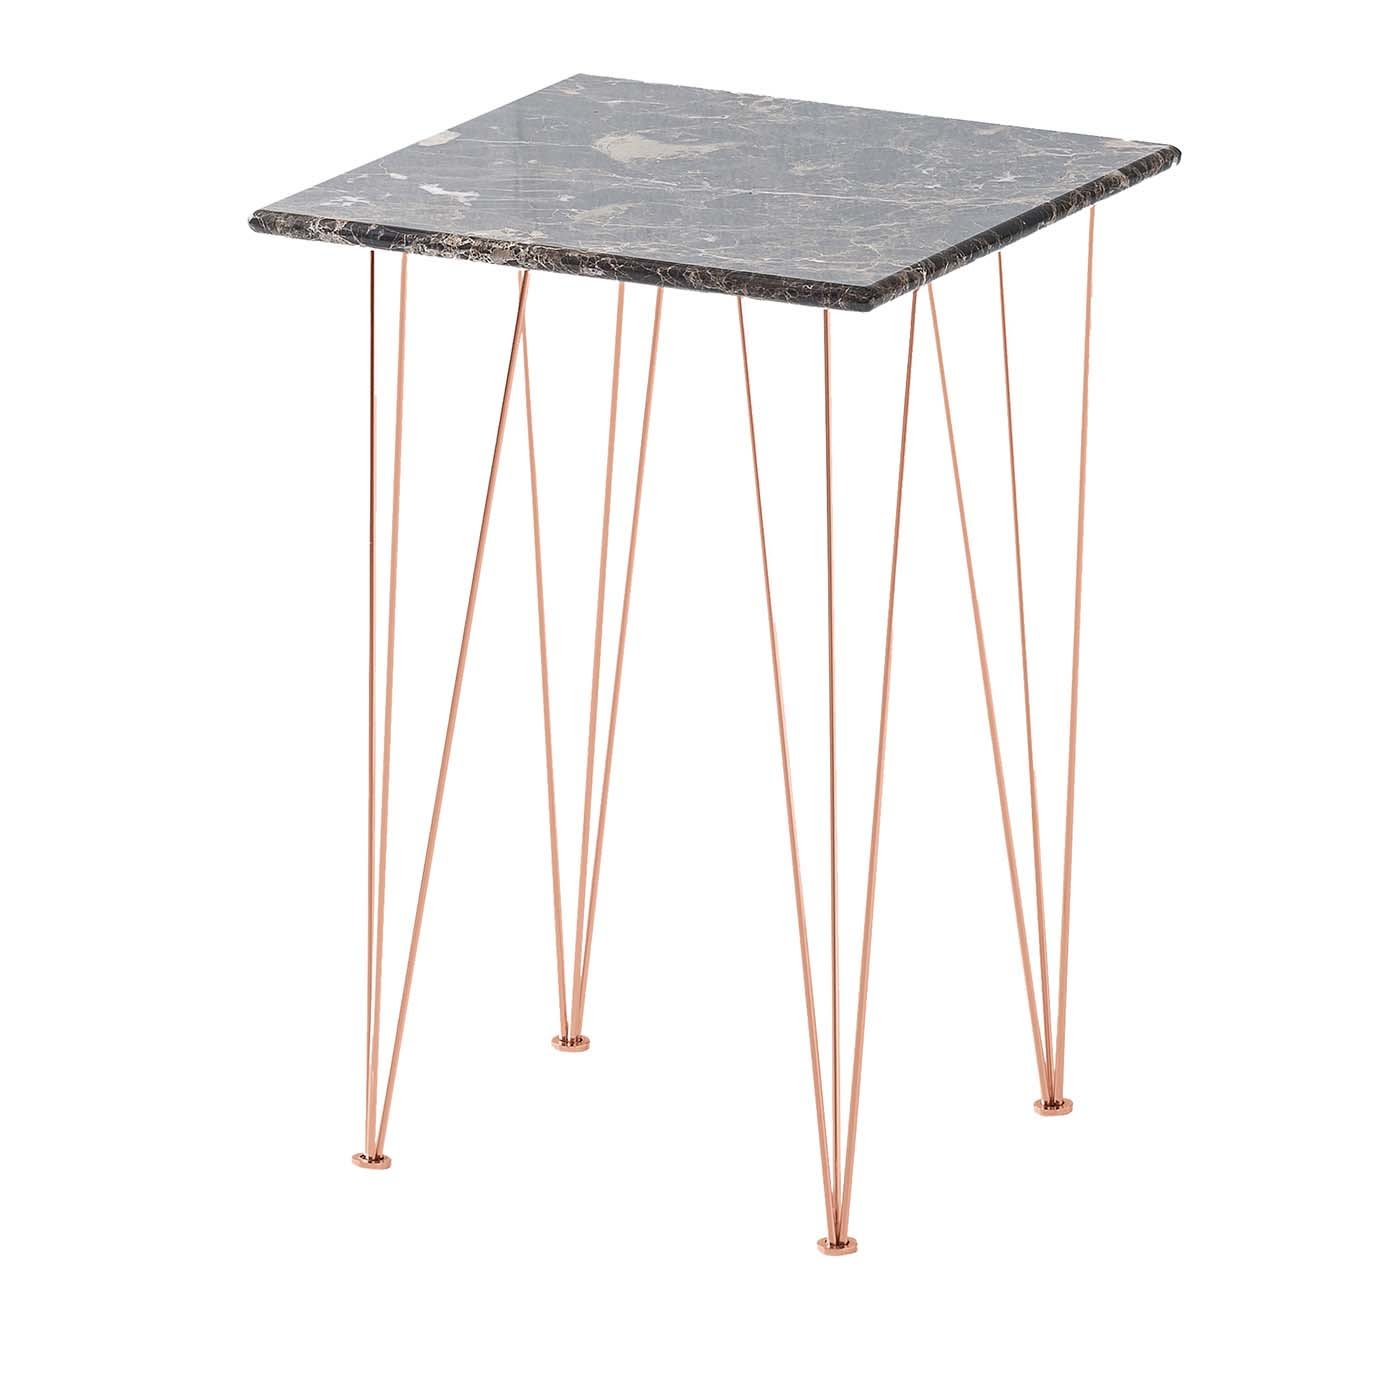 Flamingo Square Side Table with Copper Legs - Gam Home